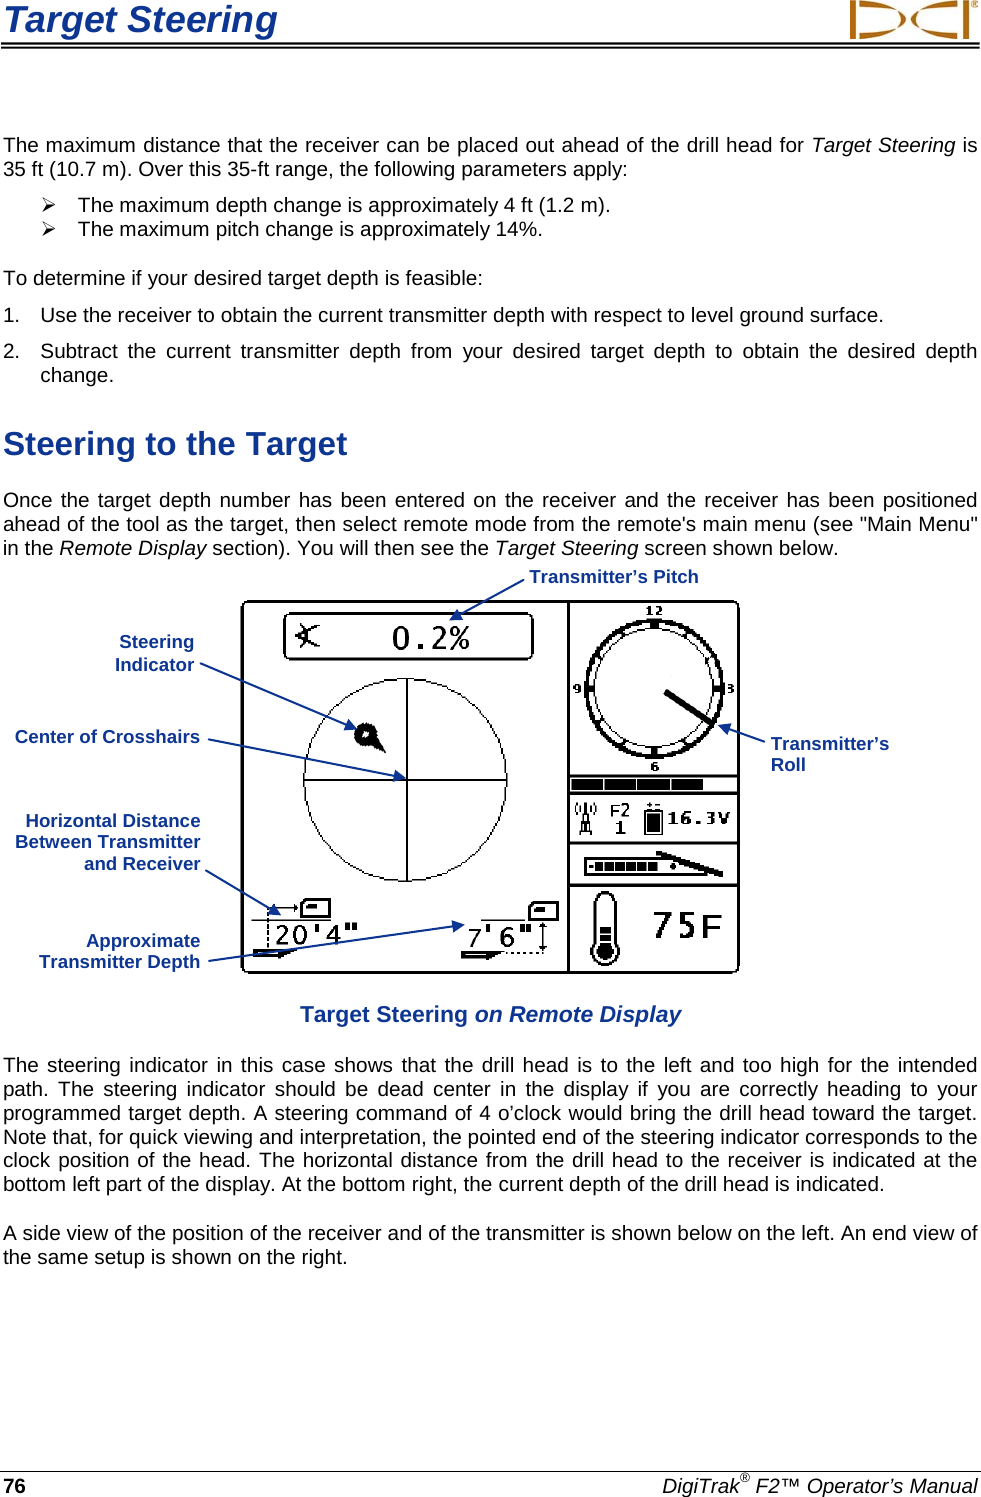 Target Steering     76 DigiTrak® F2™ Operator’s Manual The maximum distance that the receiver can be placed out ahead of the drill head for Target Steering is 35 ft (10.7 m). Over this 35-ft range, the following parameters apply:  The maximum depth change is approximately 4 ft (1.2 m).     The maximum pitch change is approximately 14%. To determine if your desired target depth is feasible: 1. Use the receiver to obtain the current transmitter depth with respect to level ground surface. 2.  Subtract the current transmitter depth from your desired target depth to obtain the desired depth change. Steering to the Target Once the target depth number has been entered on the receiver and the receiver has been positioned ahead of the tool as the target, then select remote mode from the remote&apos;s main menu (see &quot;Main Menu&quot; in the Remote Display section). You will then see the Target Steering screen shown below.   Target Steering on Remote Display The steering indicator in this case shows that the drill head is to the left and too high for the intended path. The steering indicator should be dead center in the display if you are correctly heading to your programmed target depth. A steering command of 4 o’clock would bring the drill head toward the target. Note that, for quick viewing and interpretation, the pointed end of the steering indicator corresponds to the clock position of the head. The horizontal distance from the drill head to the receiver is indicated at the bottom left part of the display. At the bottom right, the current depth of the drill head is indicated. A side view of the position of the receiver and of the transmitter is shown below on the left. An end view of the same setup is shown on the right. Horizontal Distance Between Transmitter and Receiver  Approximate Transmitter Depth  Transmitter’s Roll  Transmitter’s Pitch Steering Indicator  Center of Crosshairs 